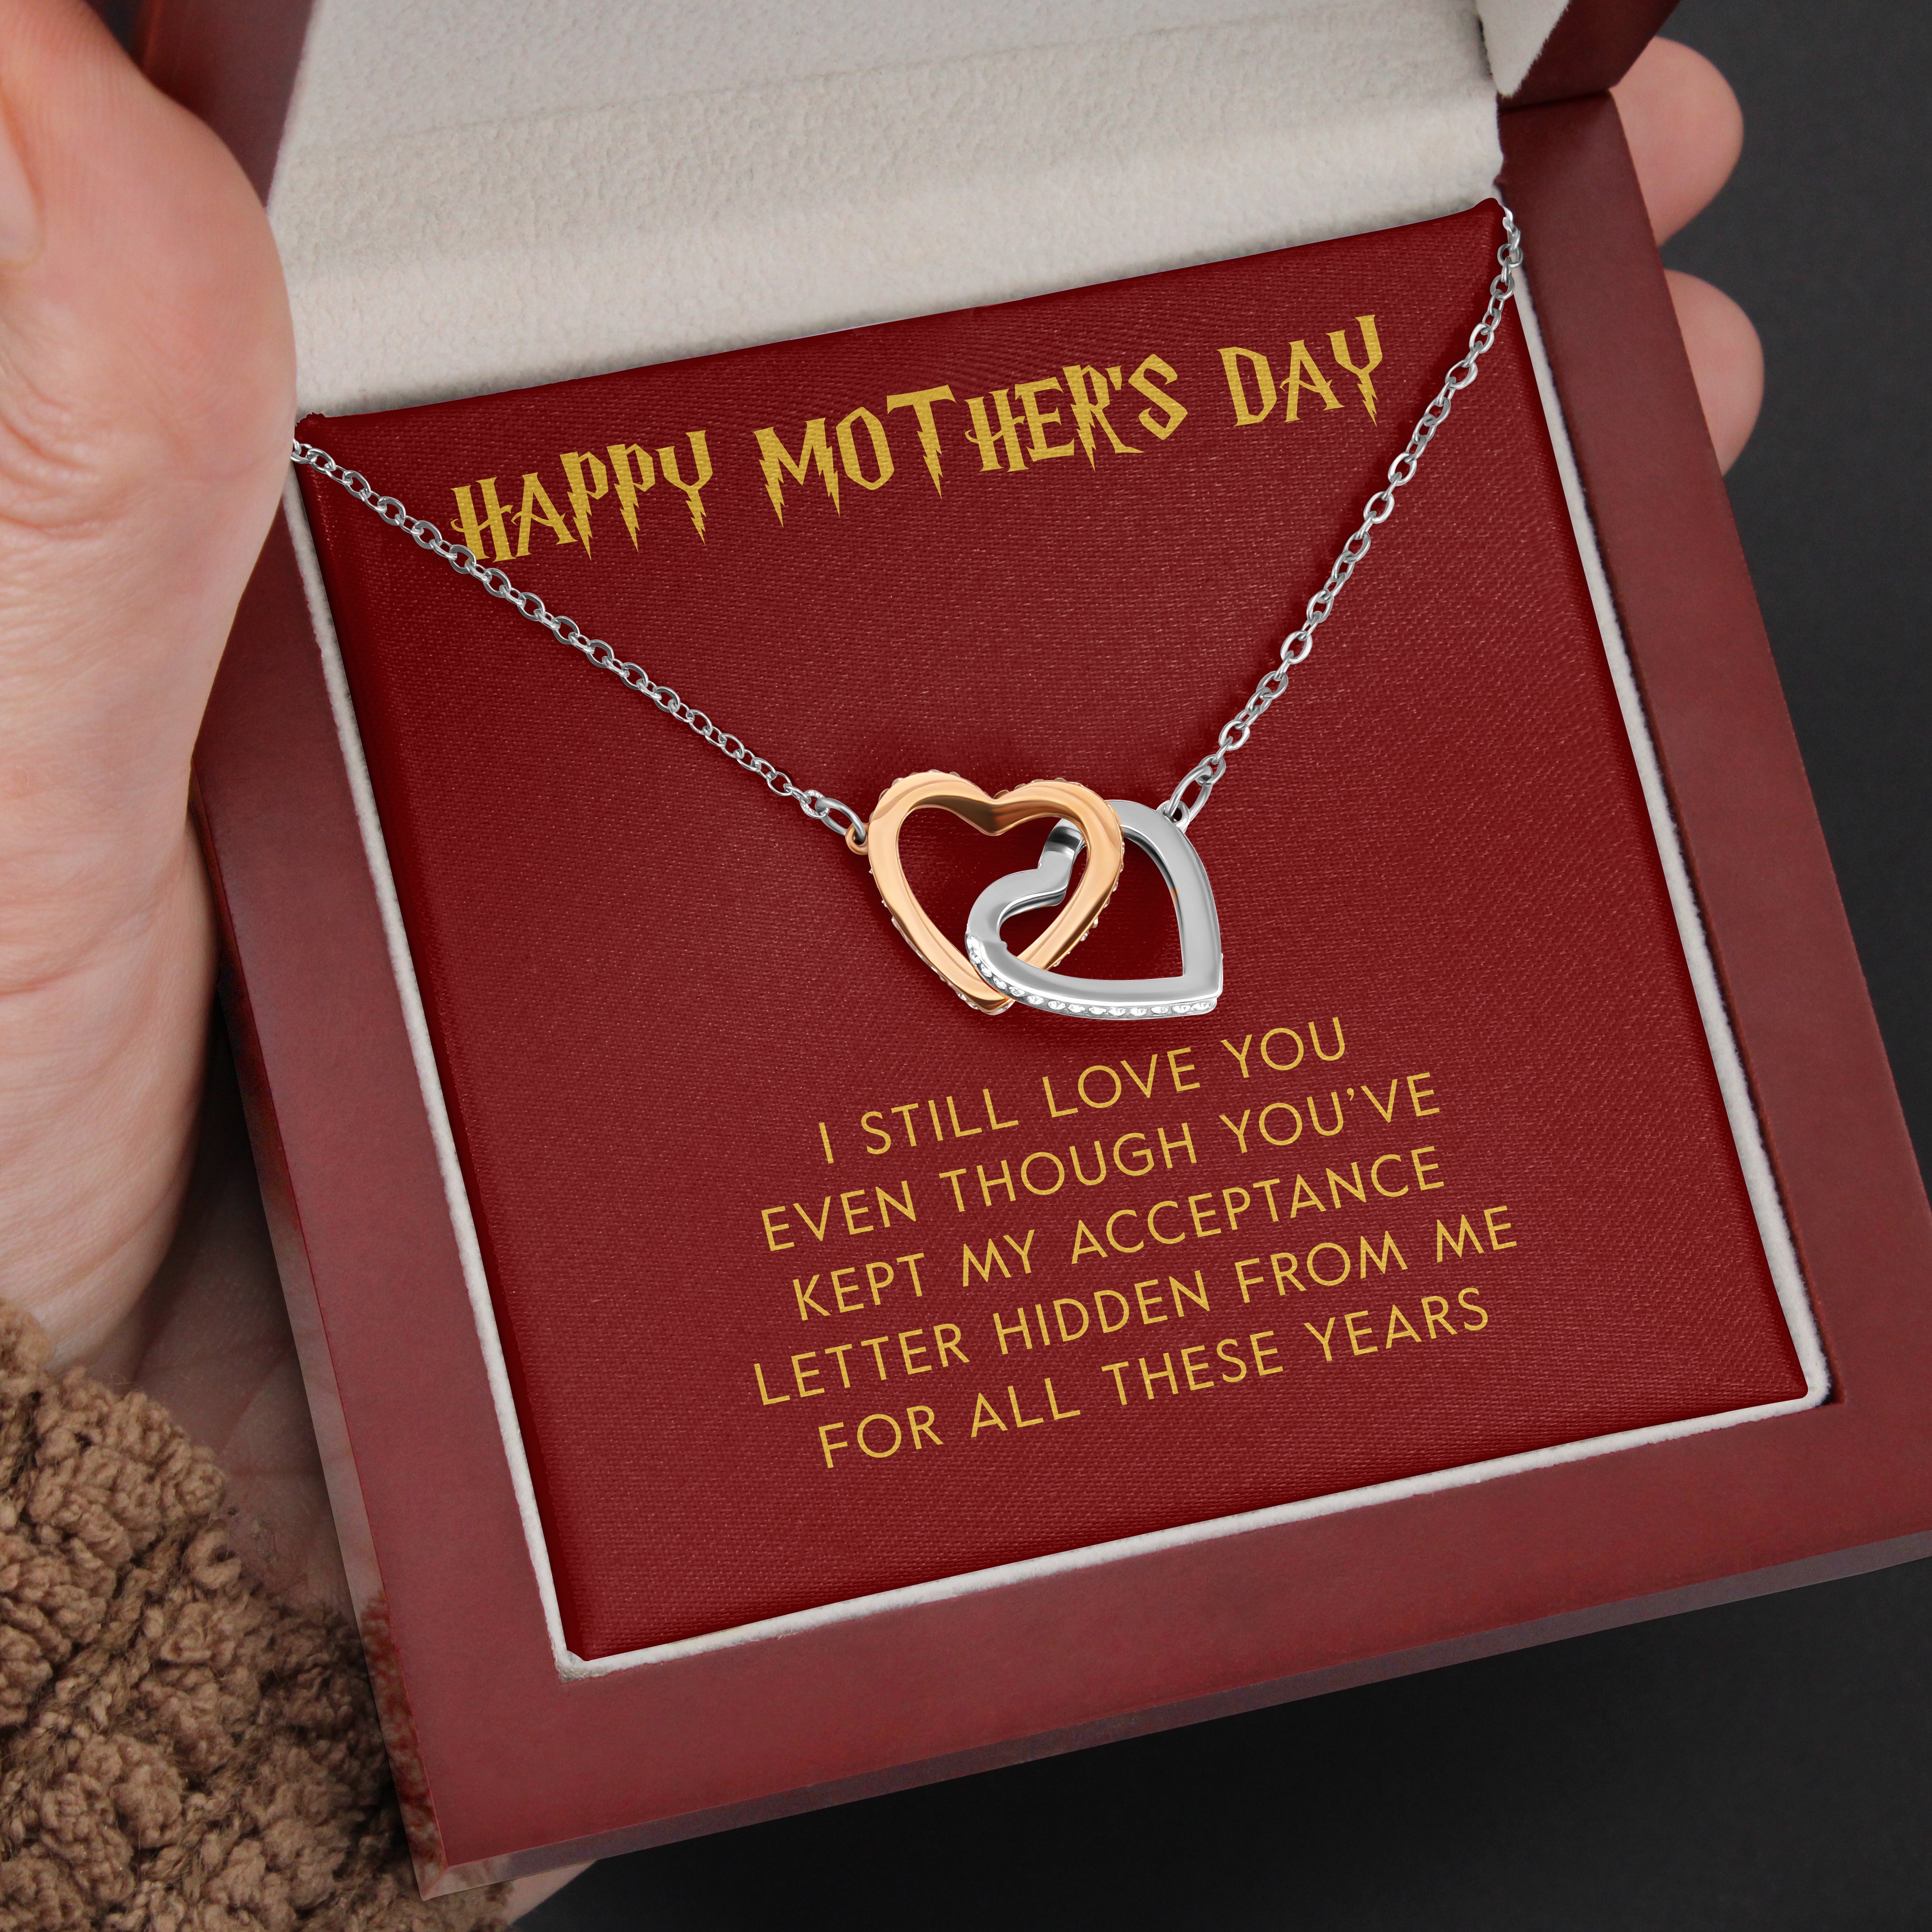 Happy Mother's Day | "Acceptance Letter" | Interlocking Hearts Necklace